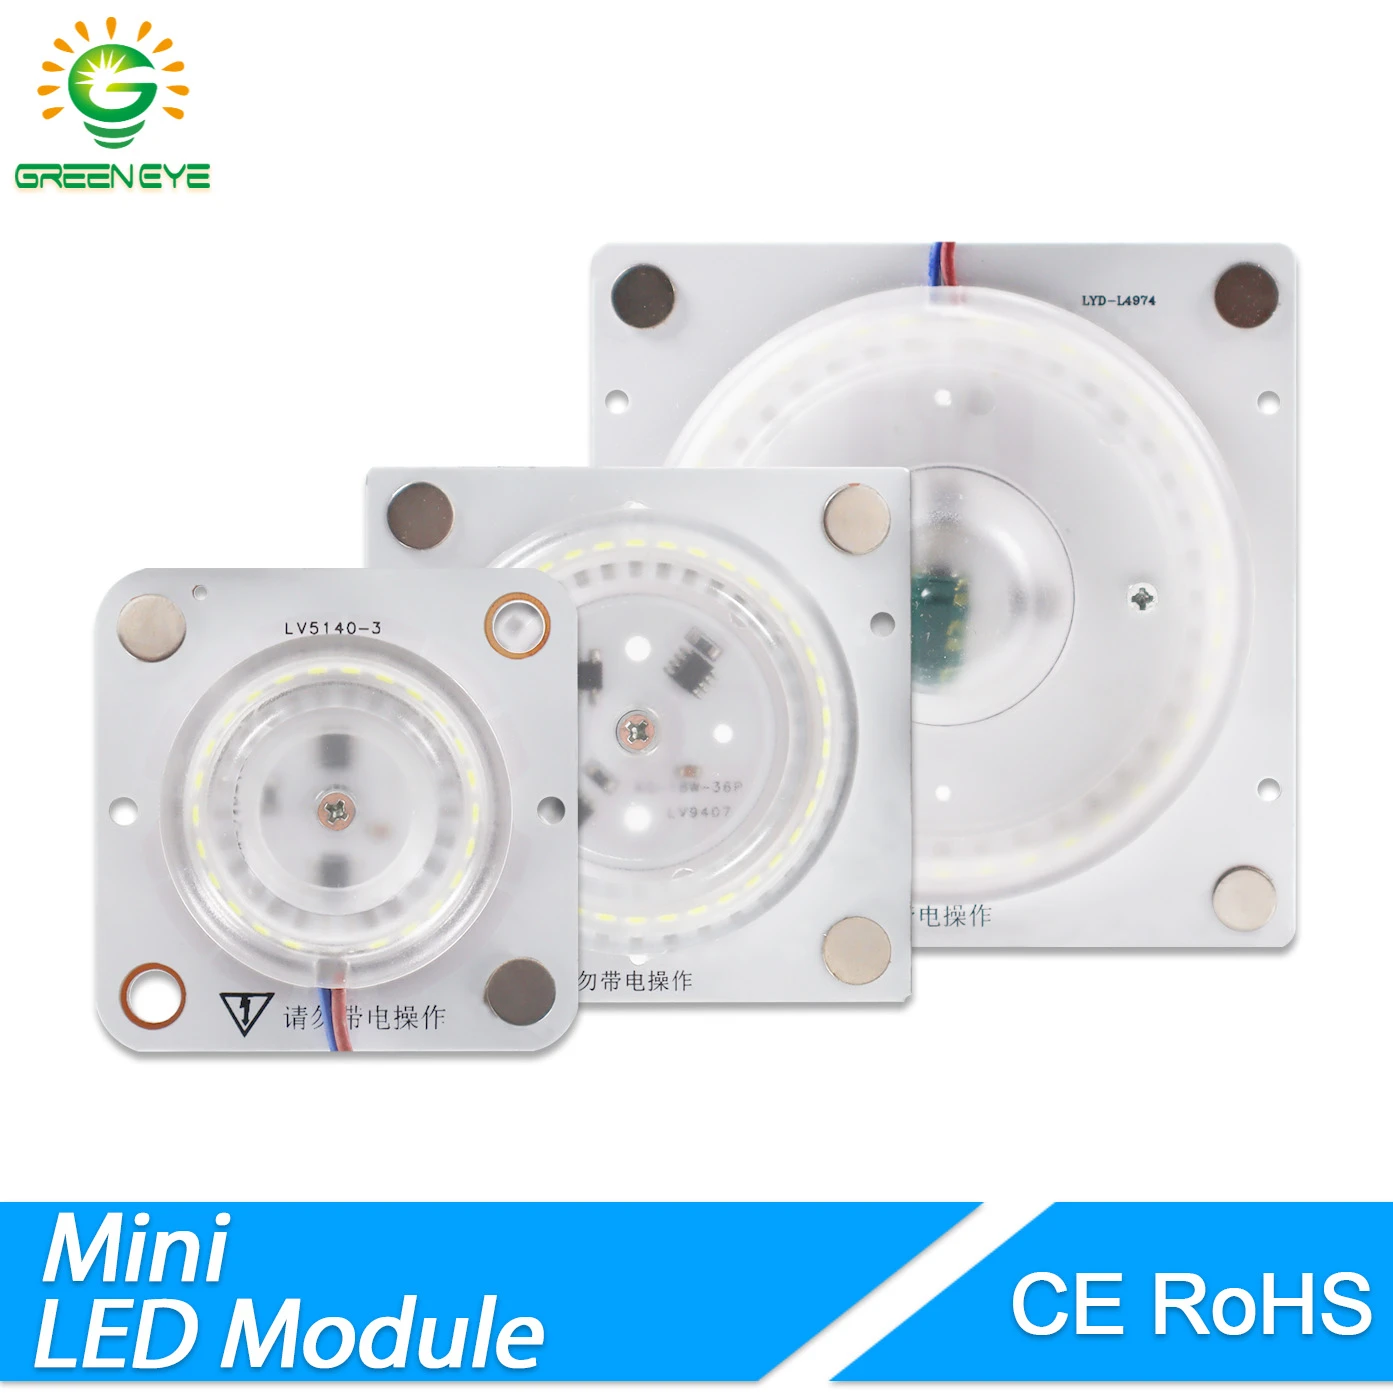 trimless downlights GreenEye Mini Led Module 12W 18W 24W For Ceiling Lamp Downlight Replace Accessory Magnetic Light Source Light Board Bulb 220V brass downlights